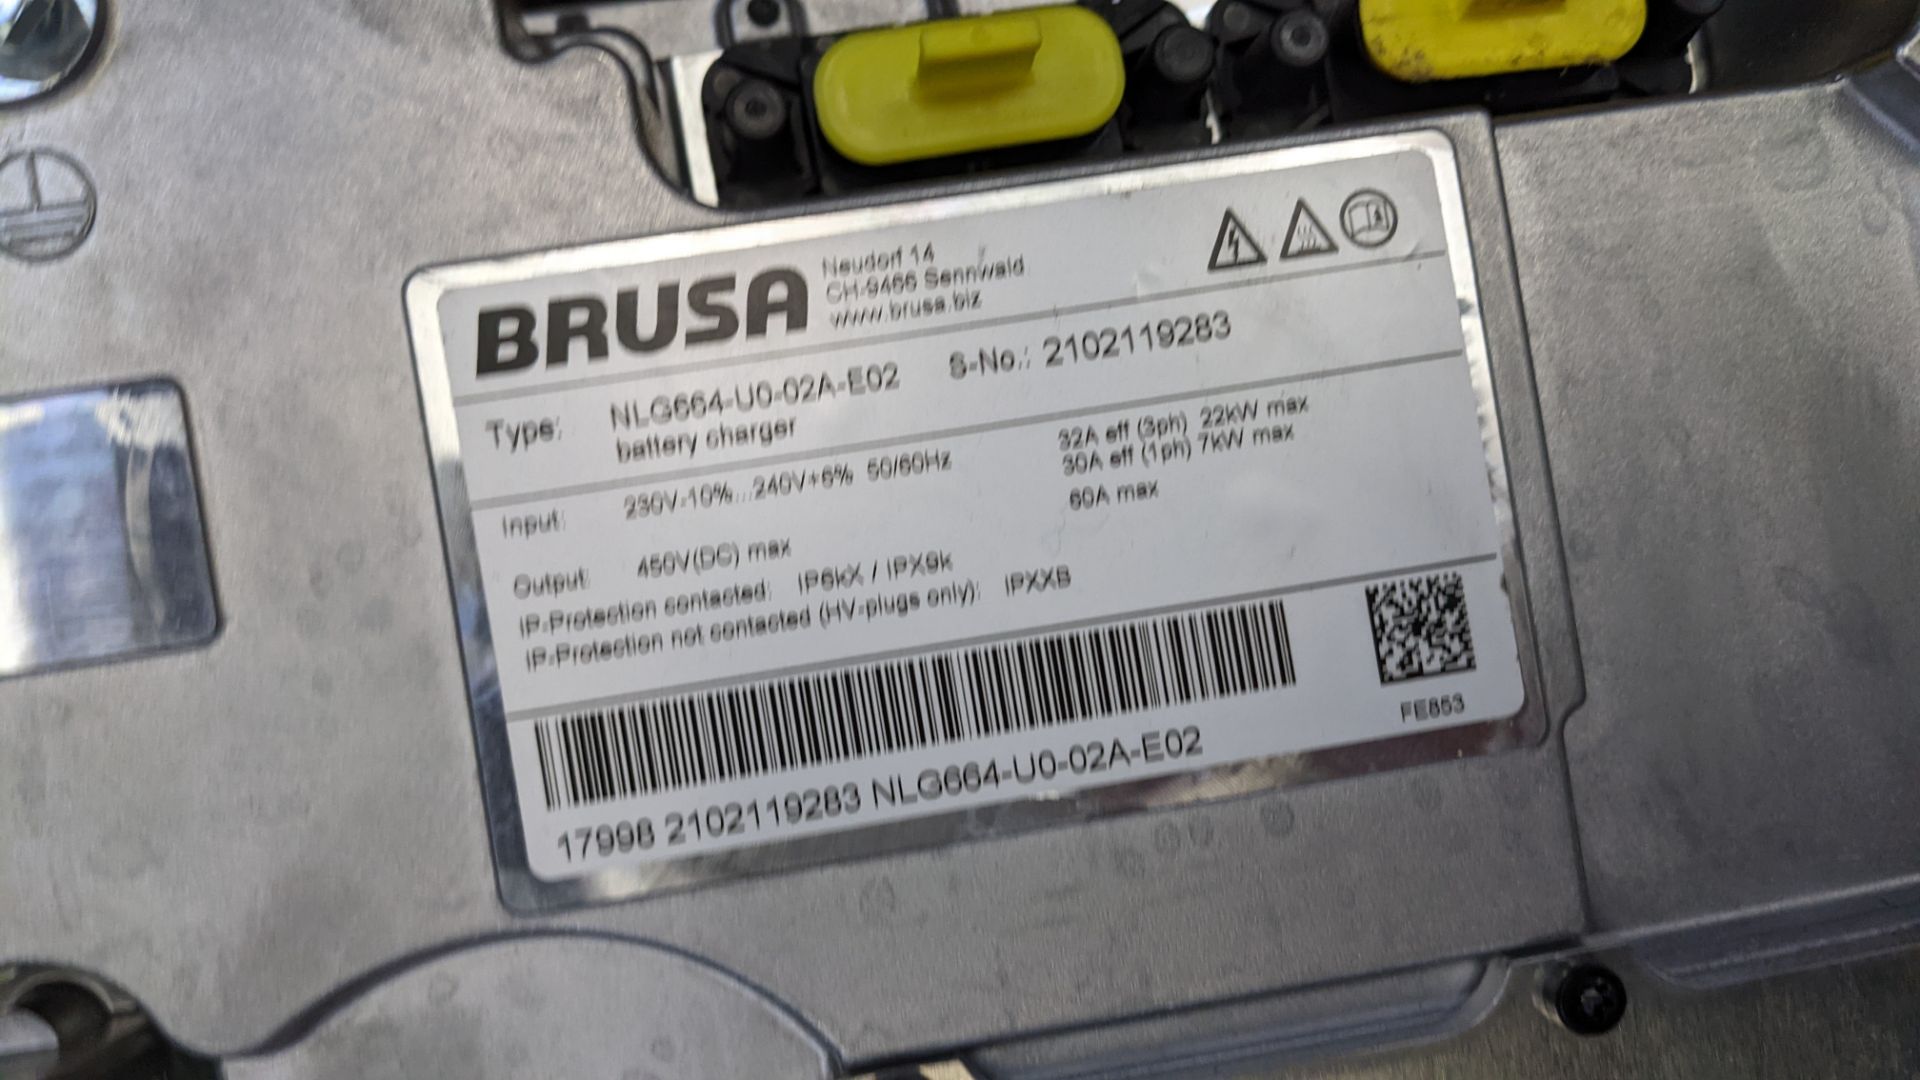 Brusa model NLG664 battery charger - Image 3 of 9